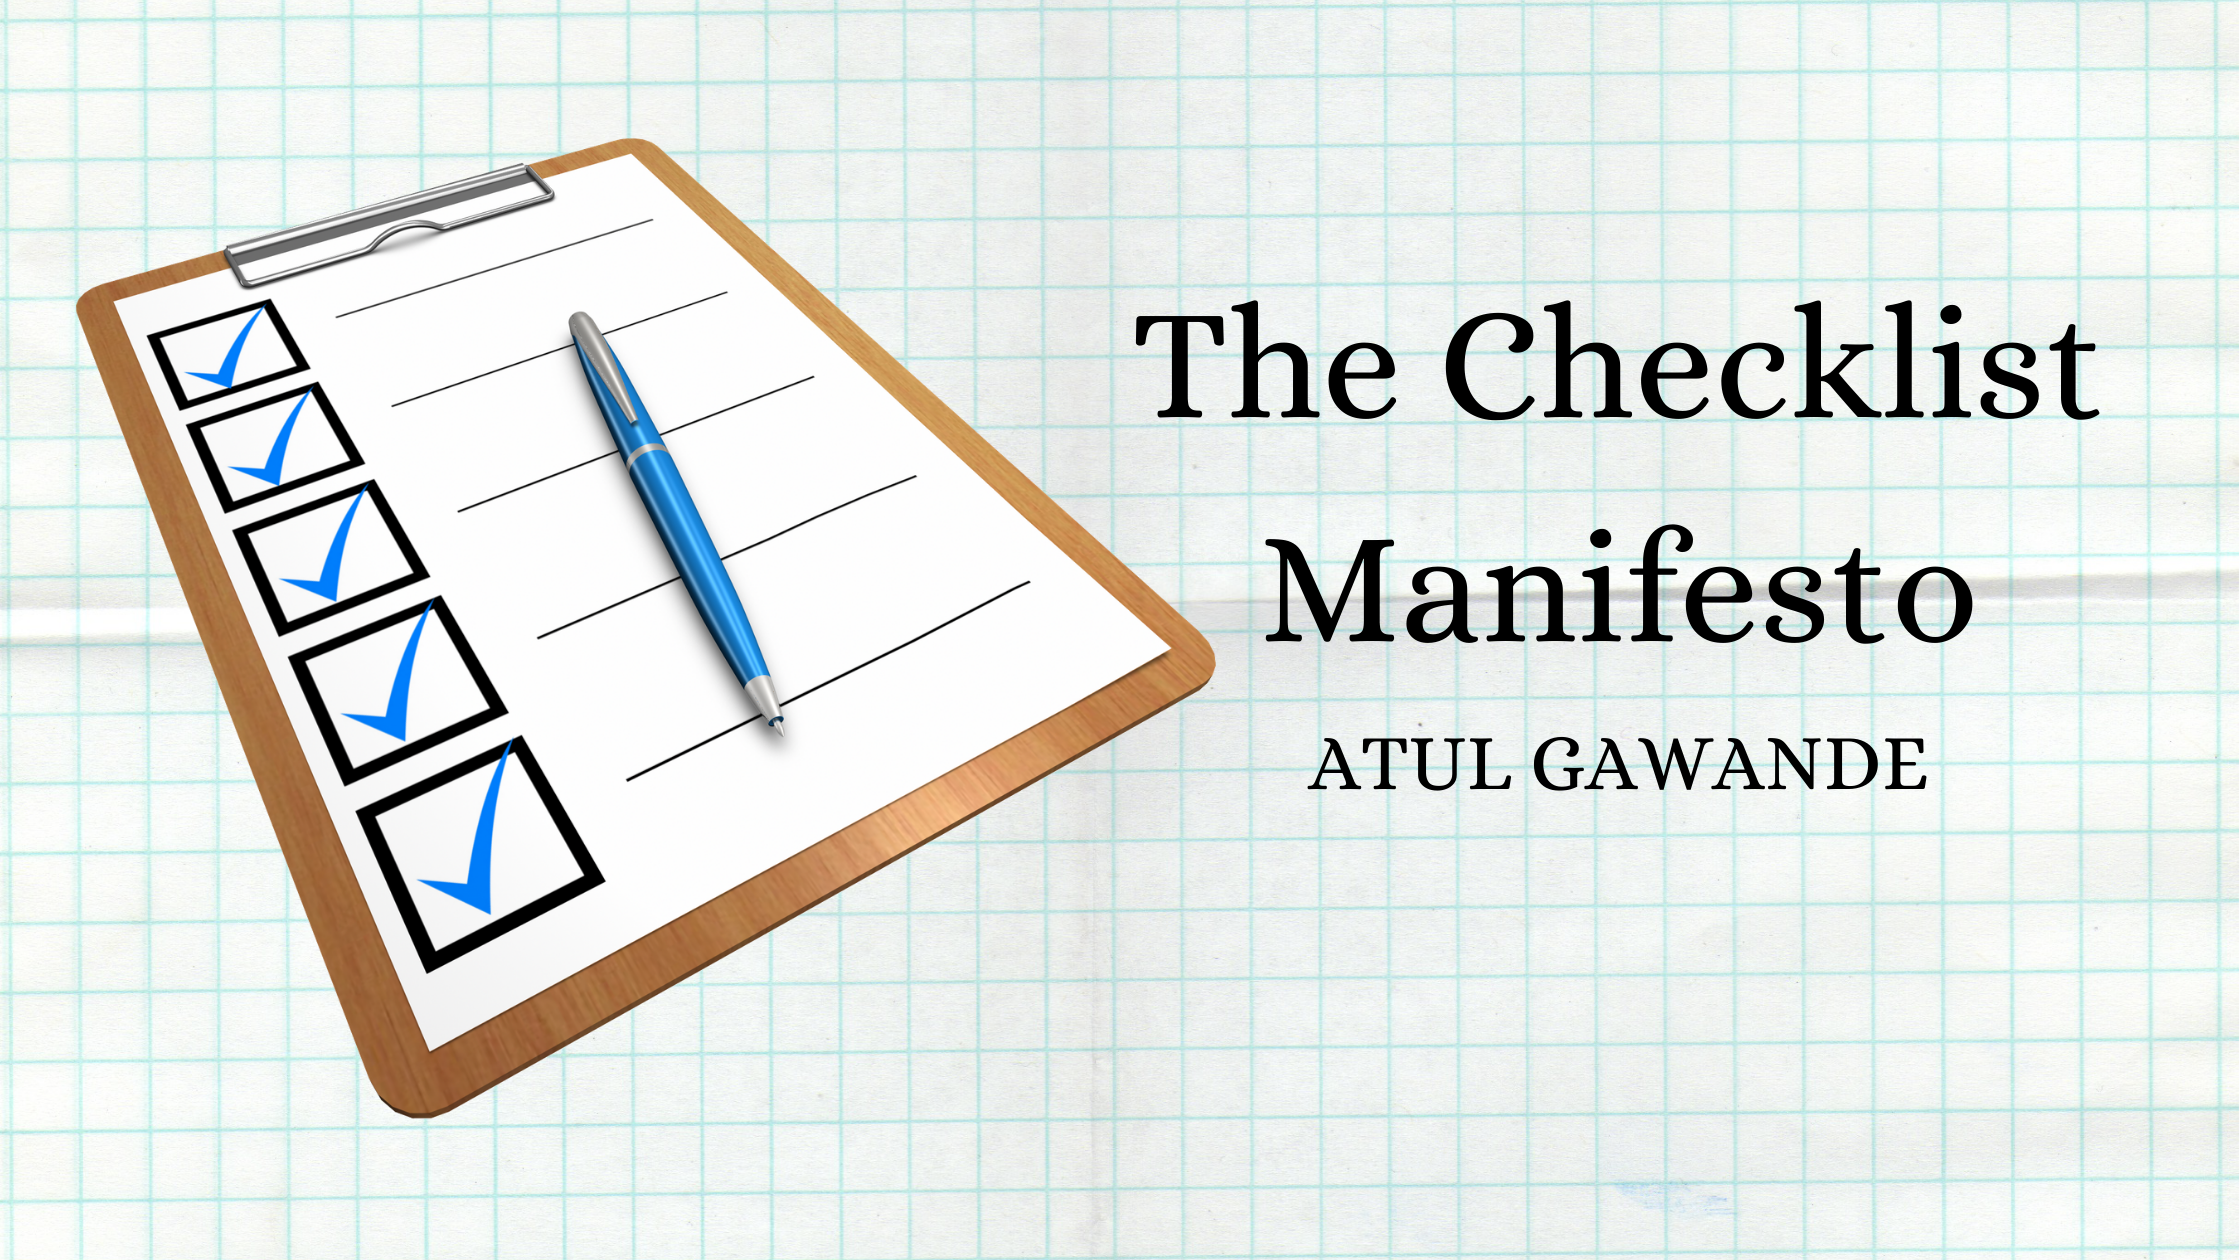 Book Review: The Checklist Manifesto By Dr. Atul Gawande